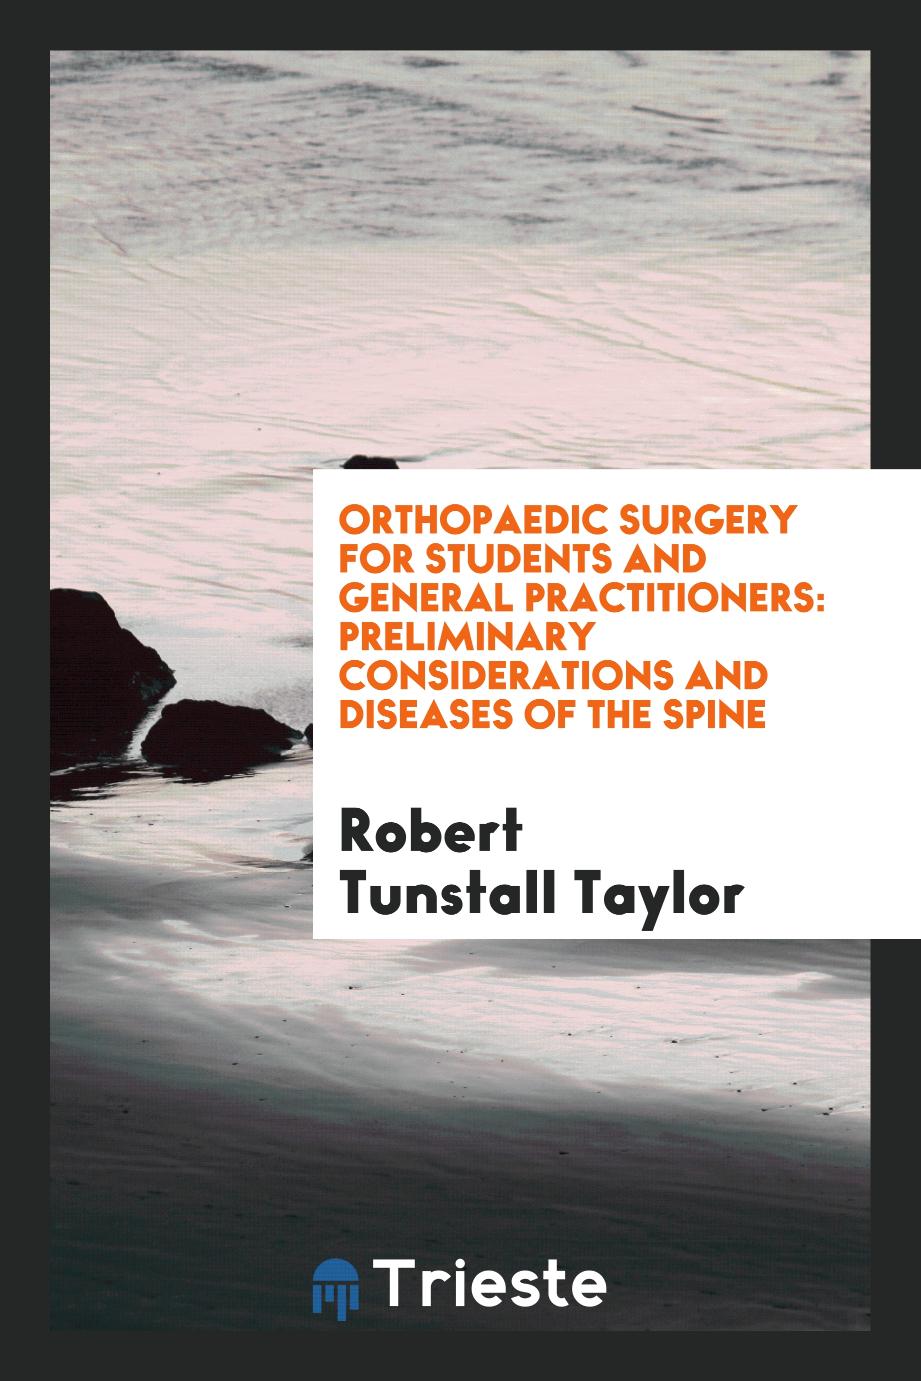 Orthopaedic Surgery for Students and General Practitioners: Preliminary Considerations and Diseases of the Spine